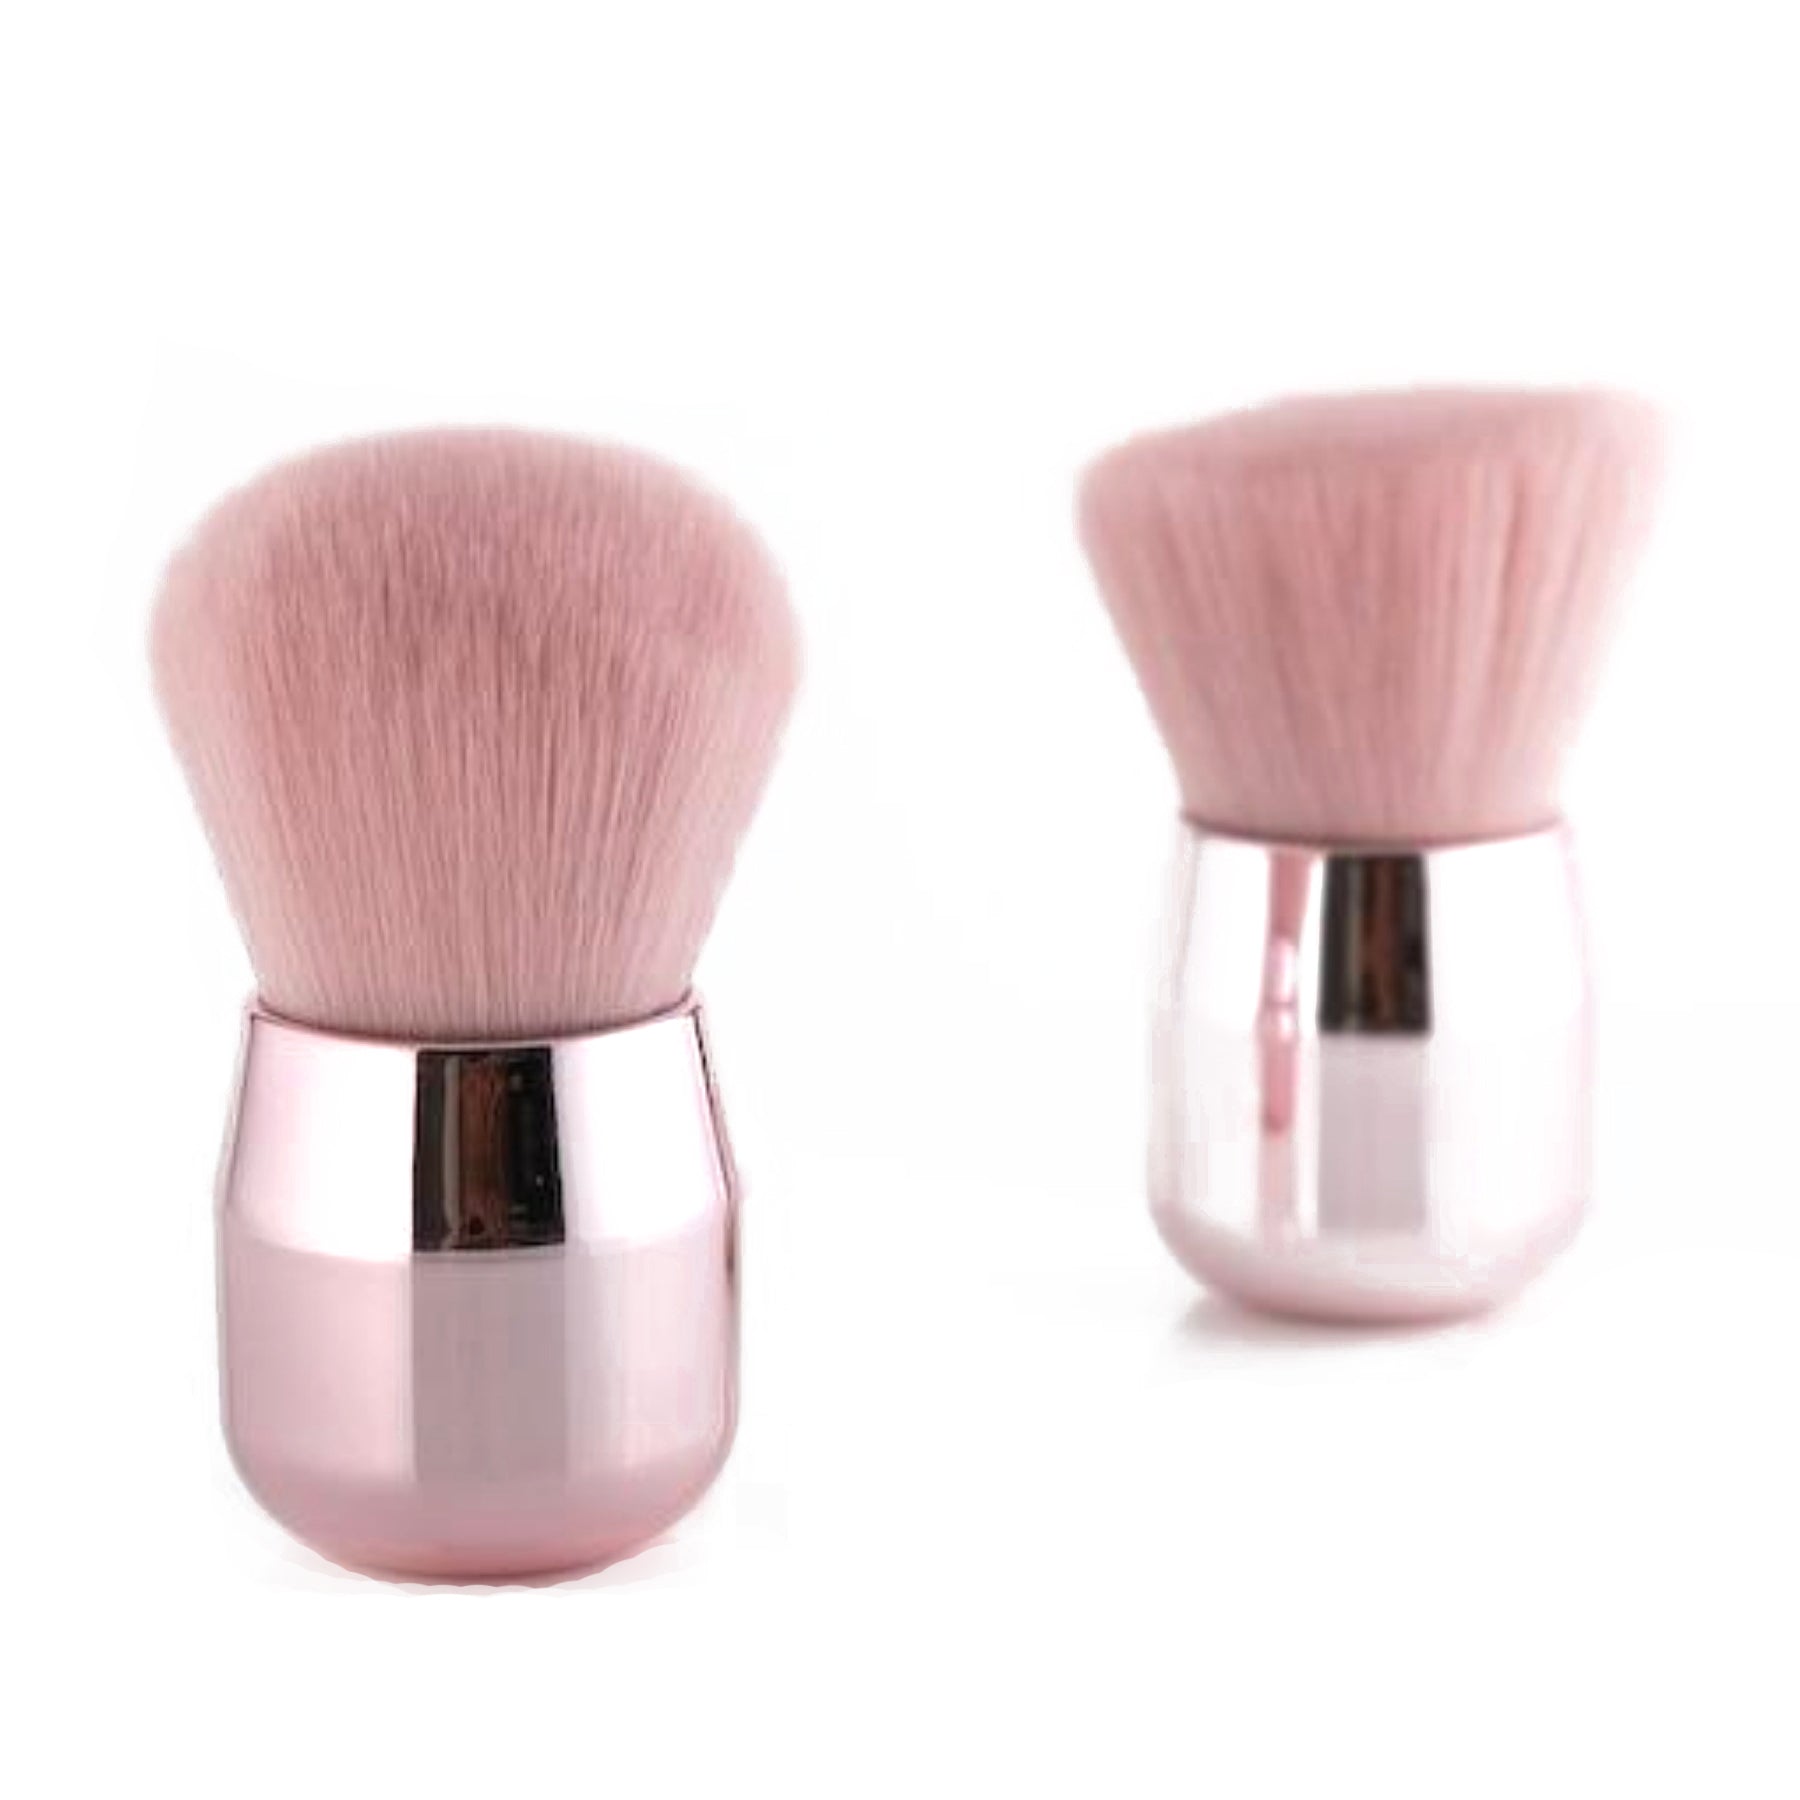 Oly Cosmetic Travel Size Makeup Brush